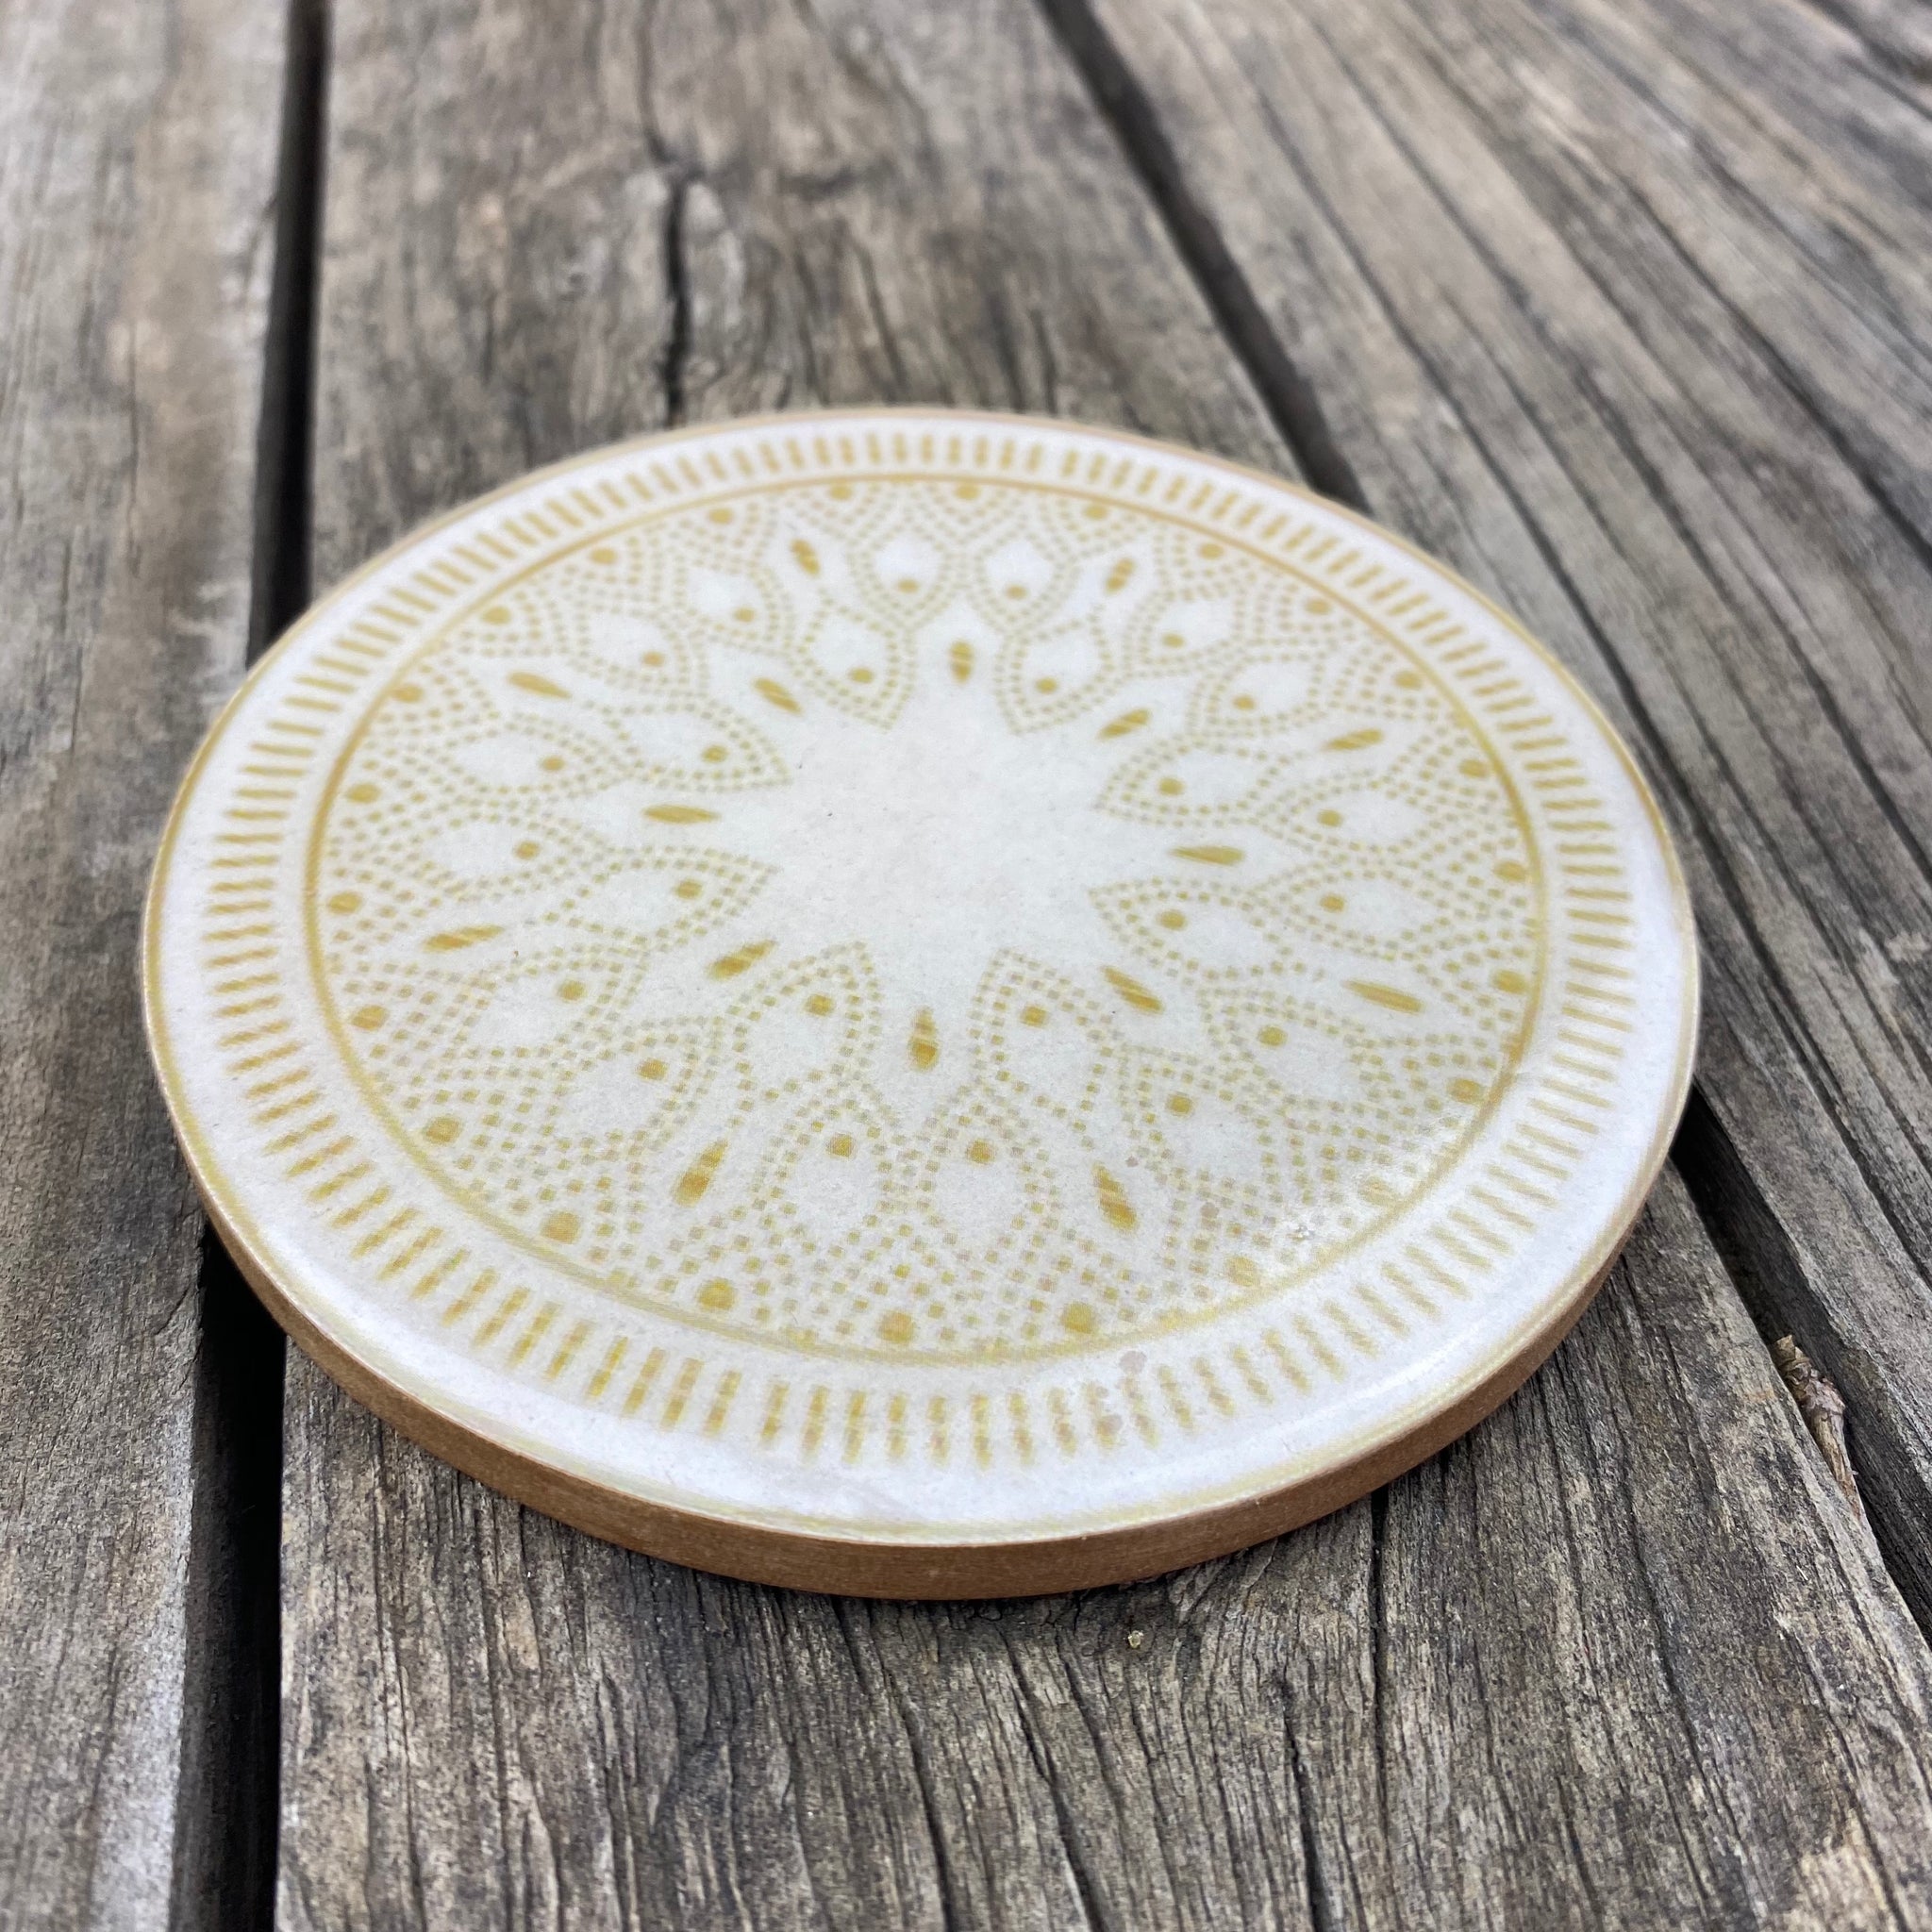 Fair Trade Ethical Round Resin Coasters